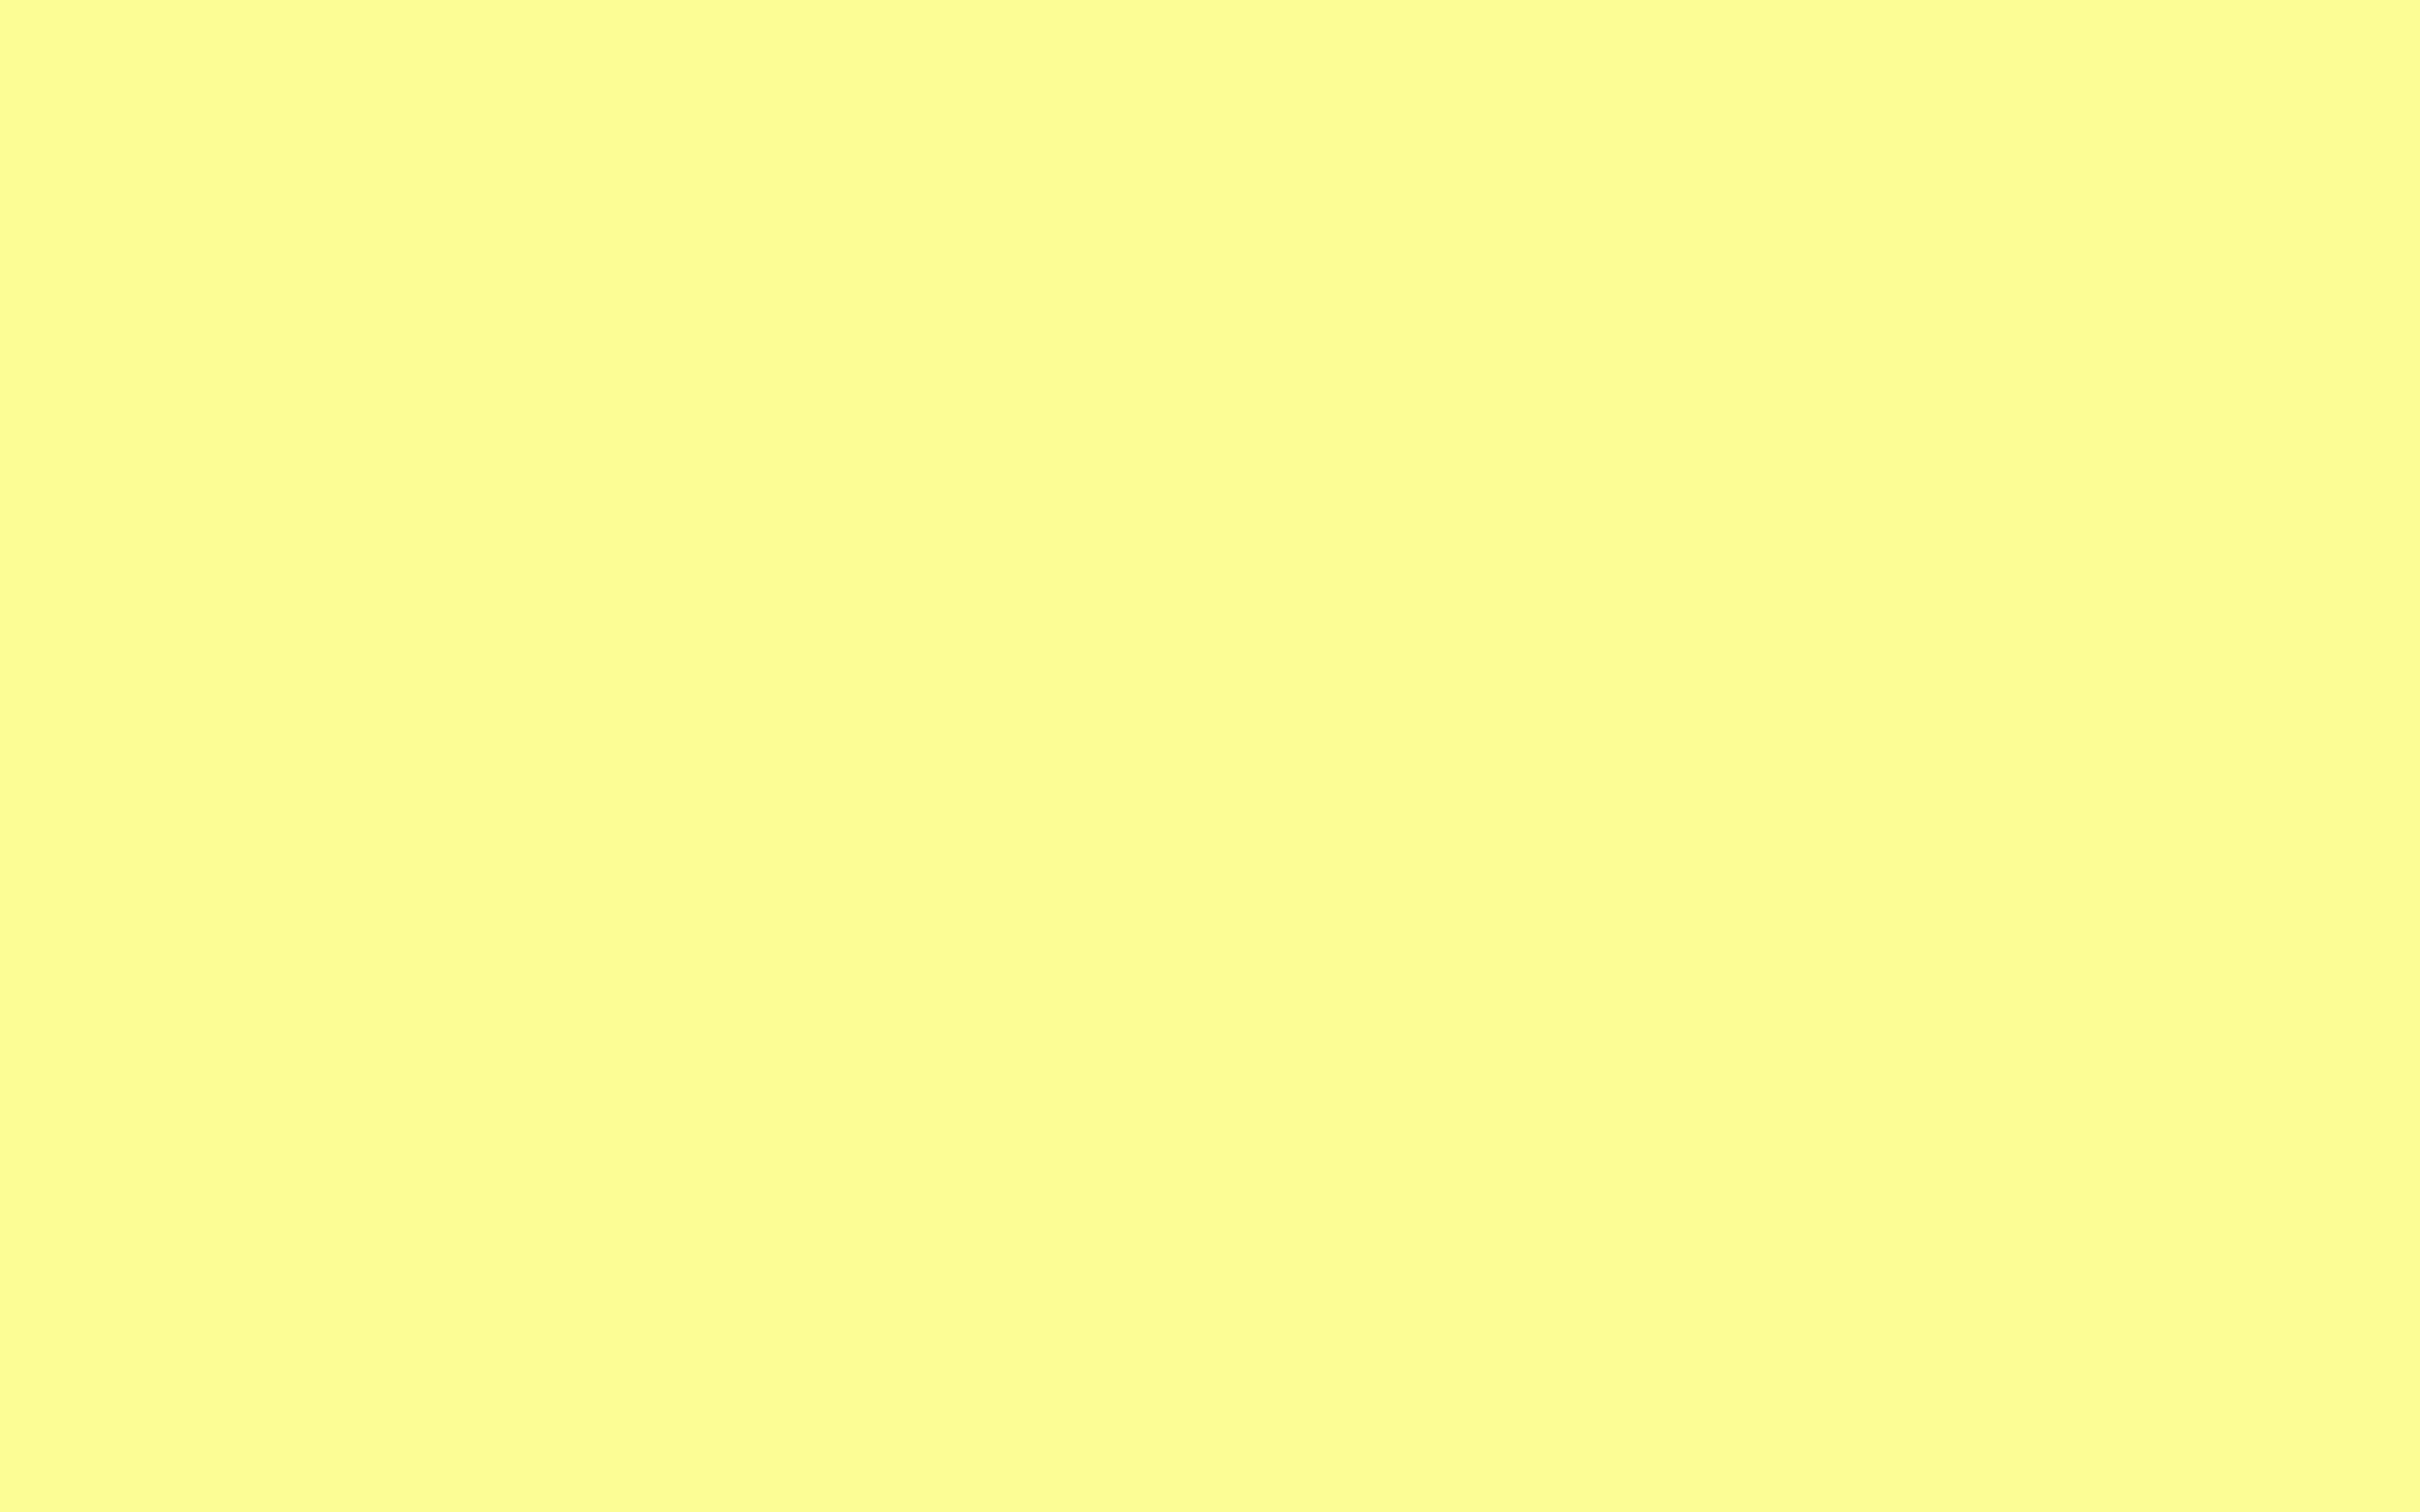 Free Download 2560x1600 Pastel Yellow Solid Color Background 2560x1600